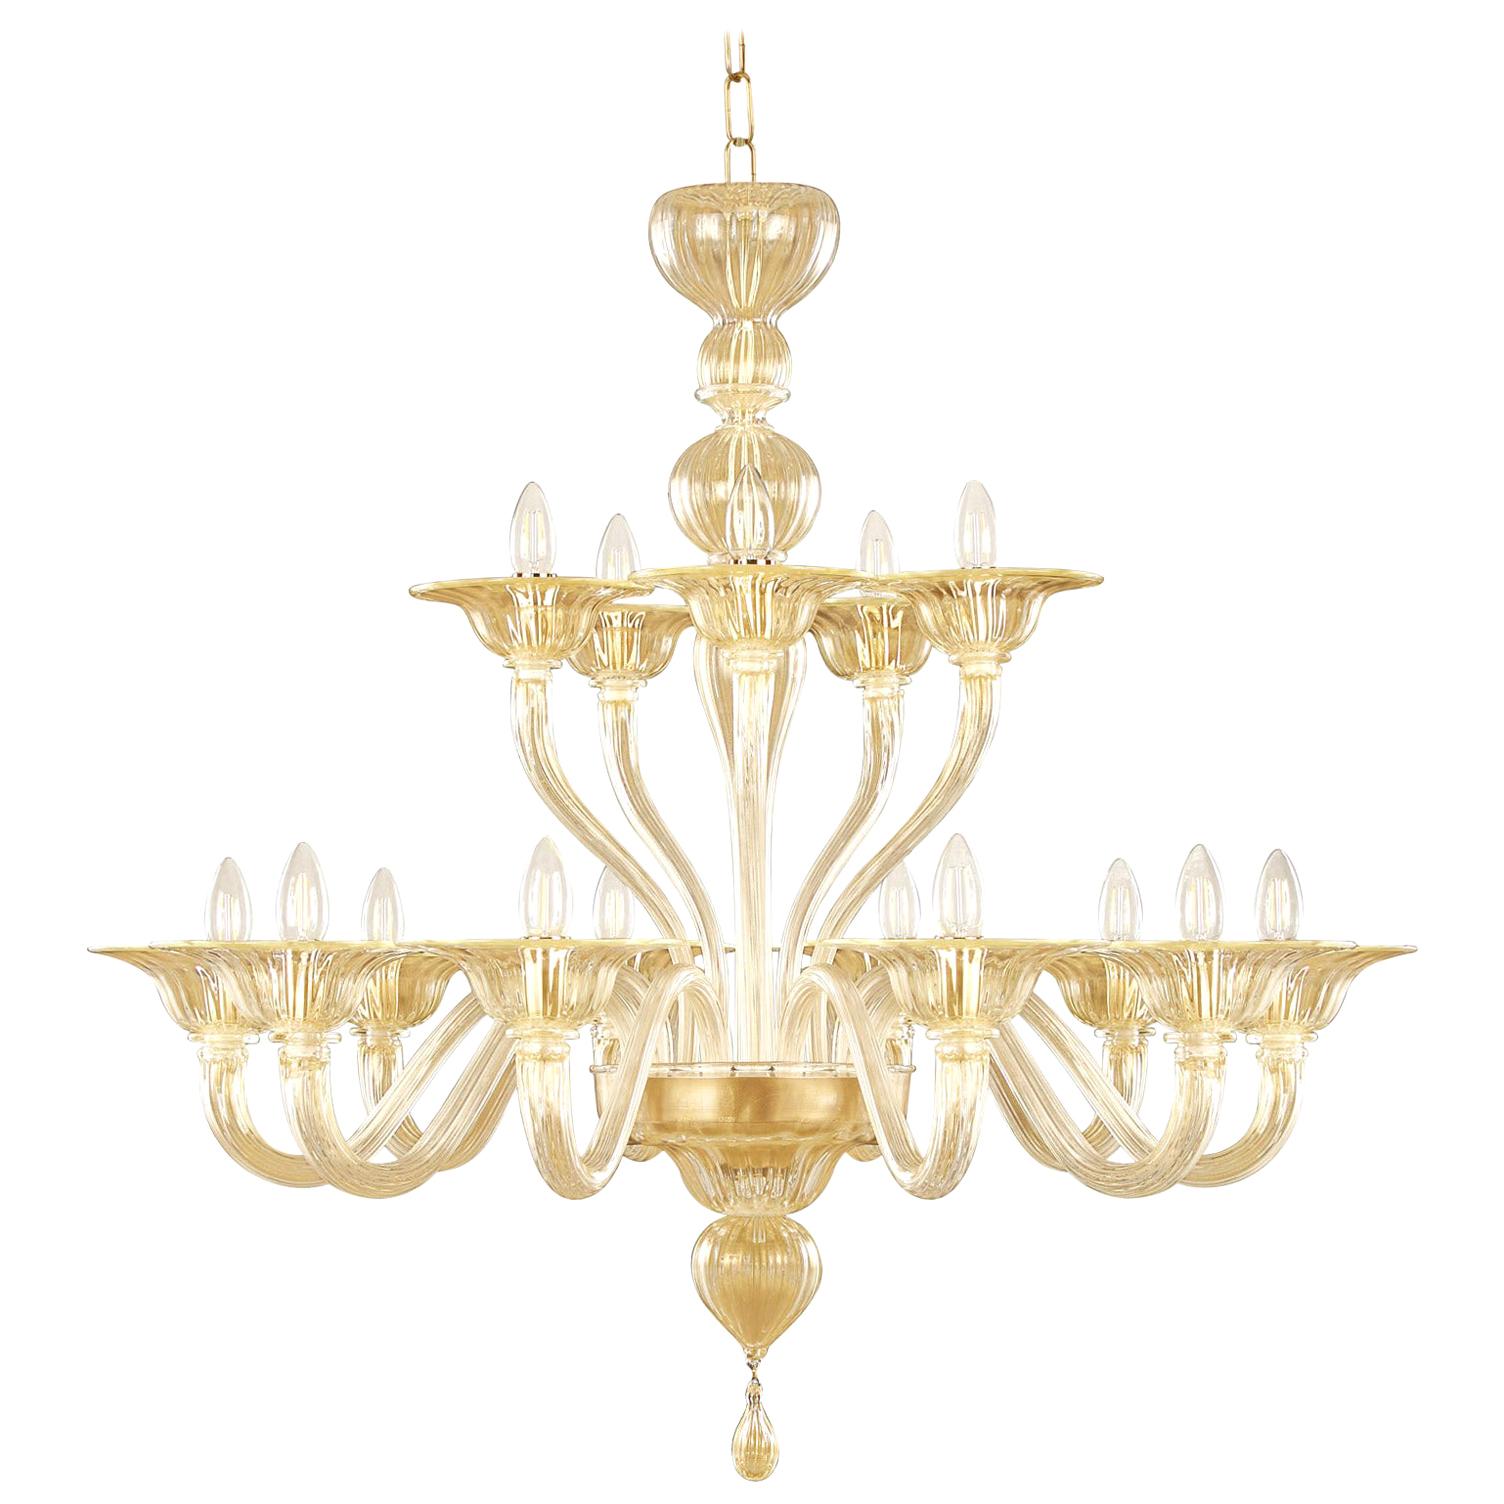 Chandelier 10+ 5 Arms Golden Artistic Glass Simplicissimus 360 by Multiforme